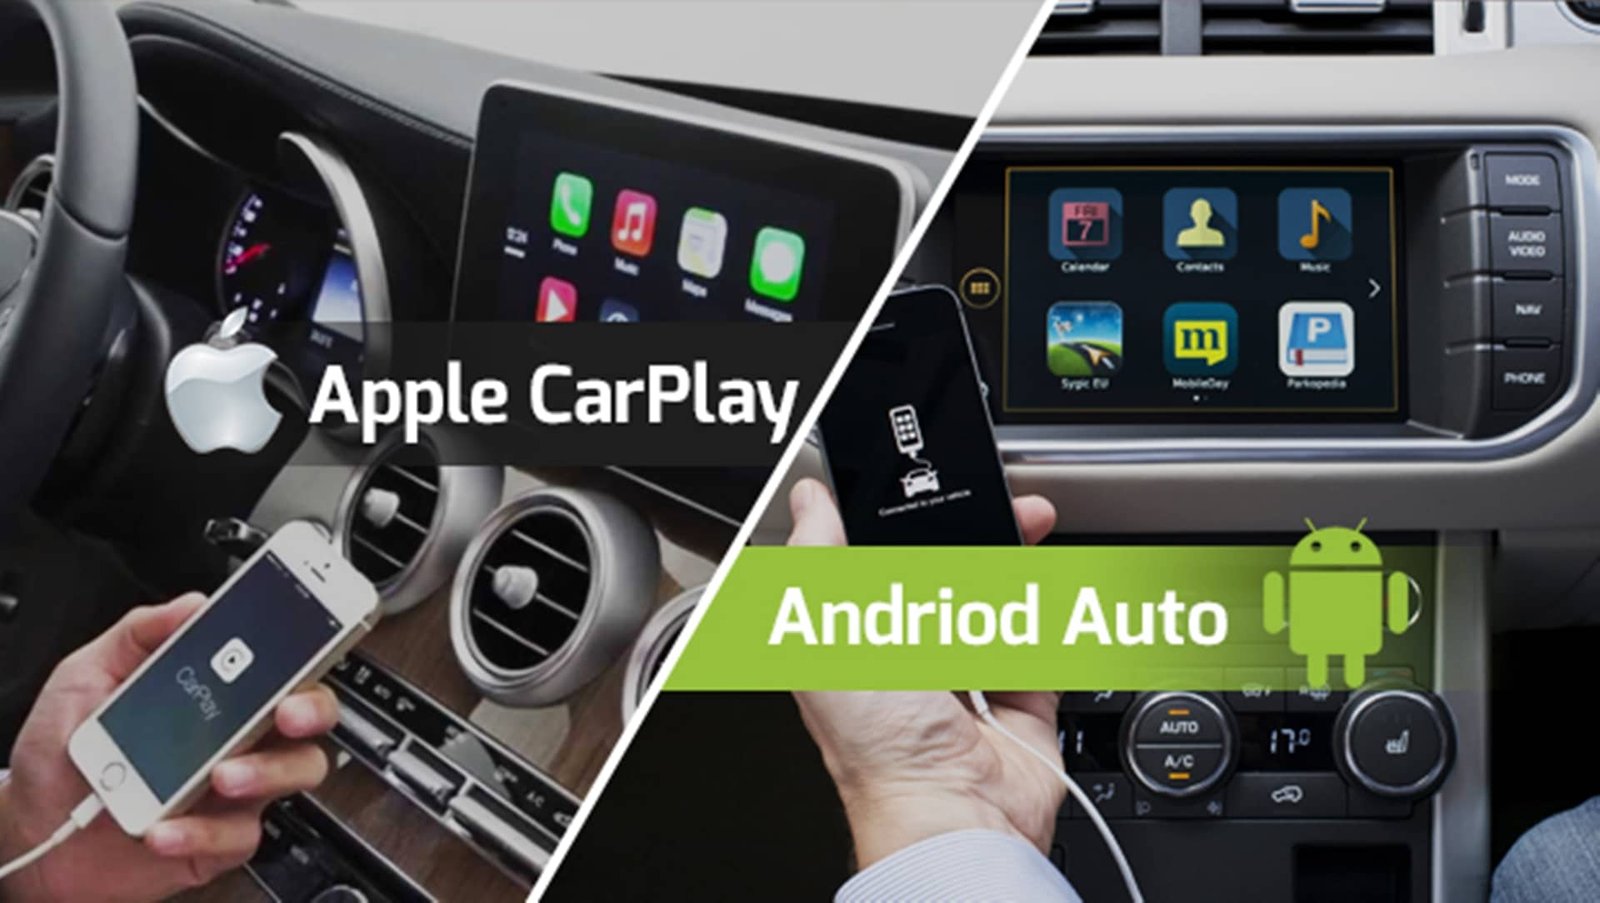 Android Auto vs. Apple CarPlay: Which Infotainment System Takes the Wheel?